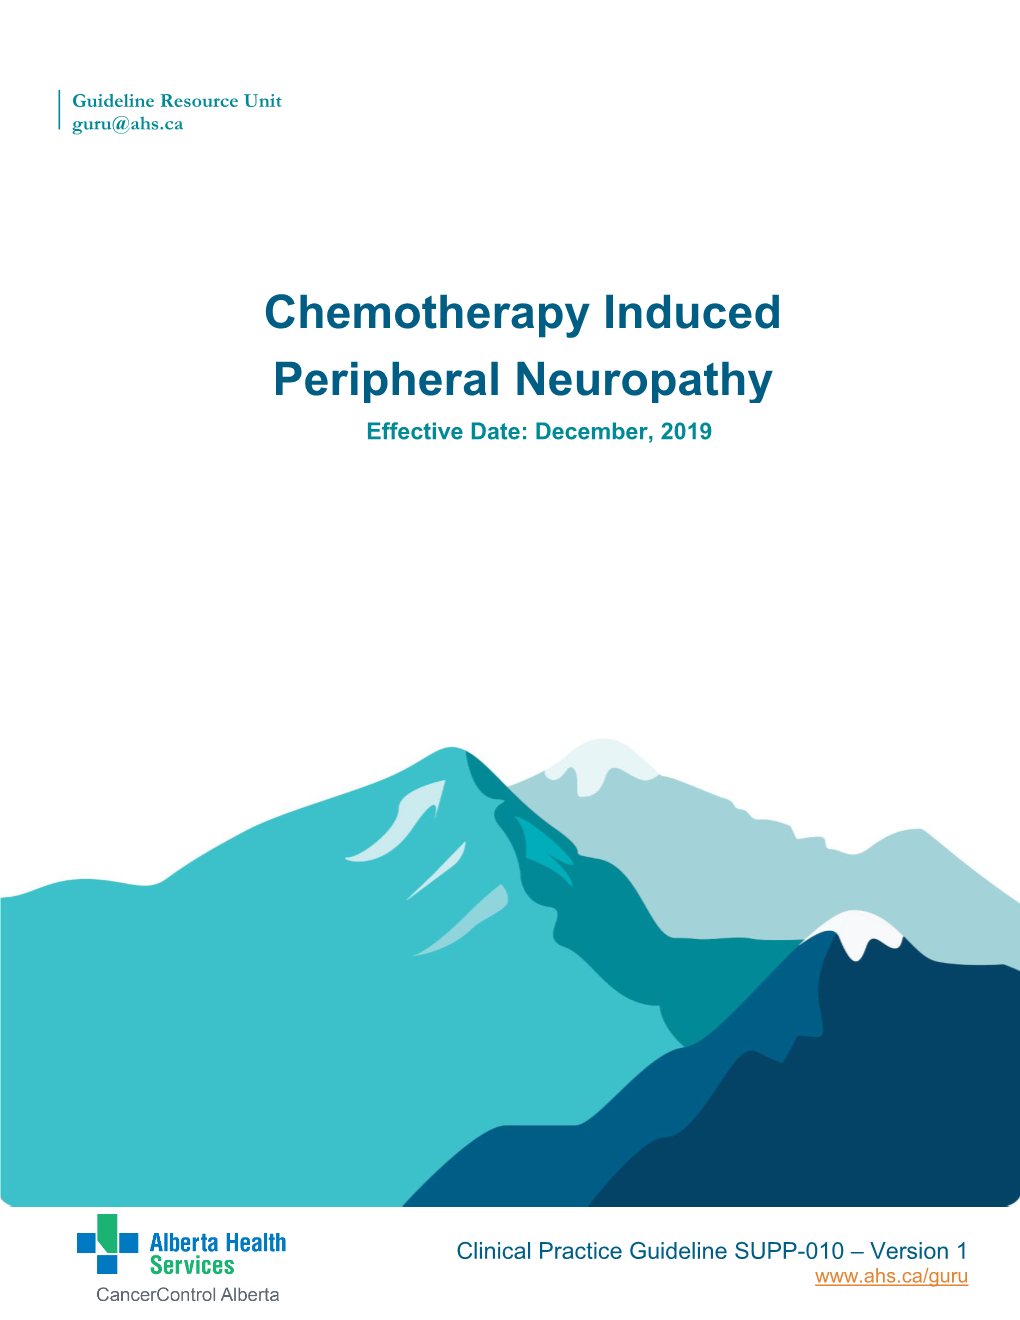 Chemotherapy Induced Peripheral Neuropathy Effective Date: December, 2019